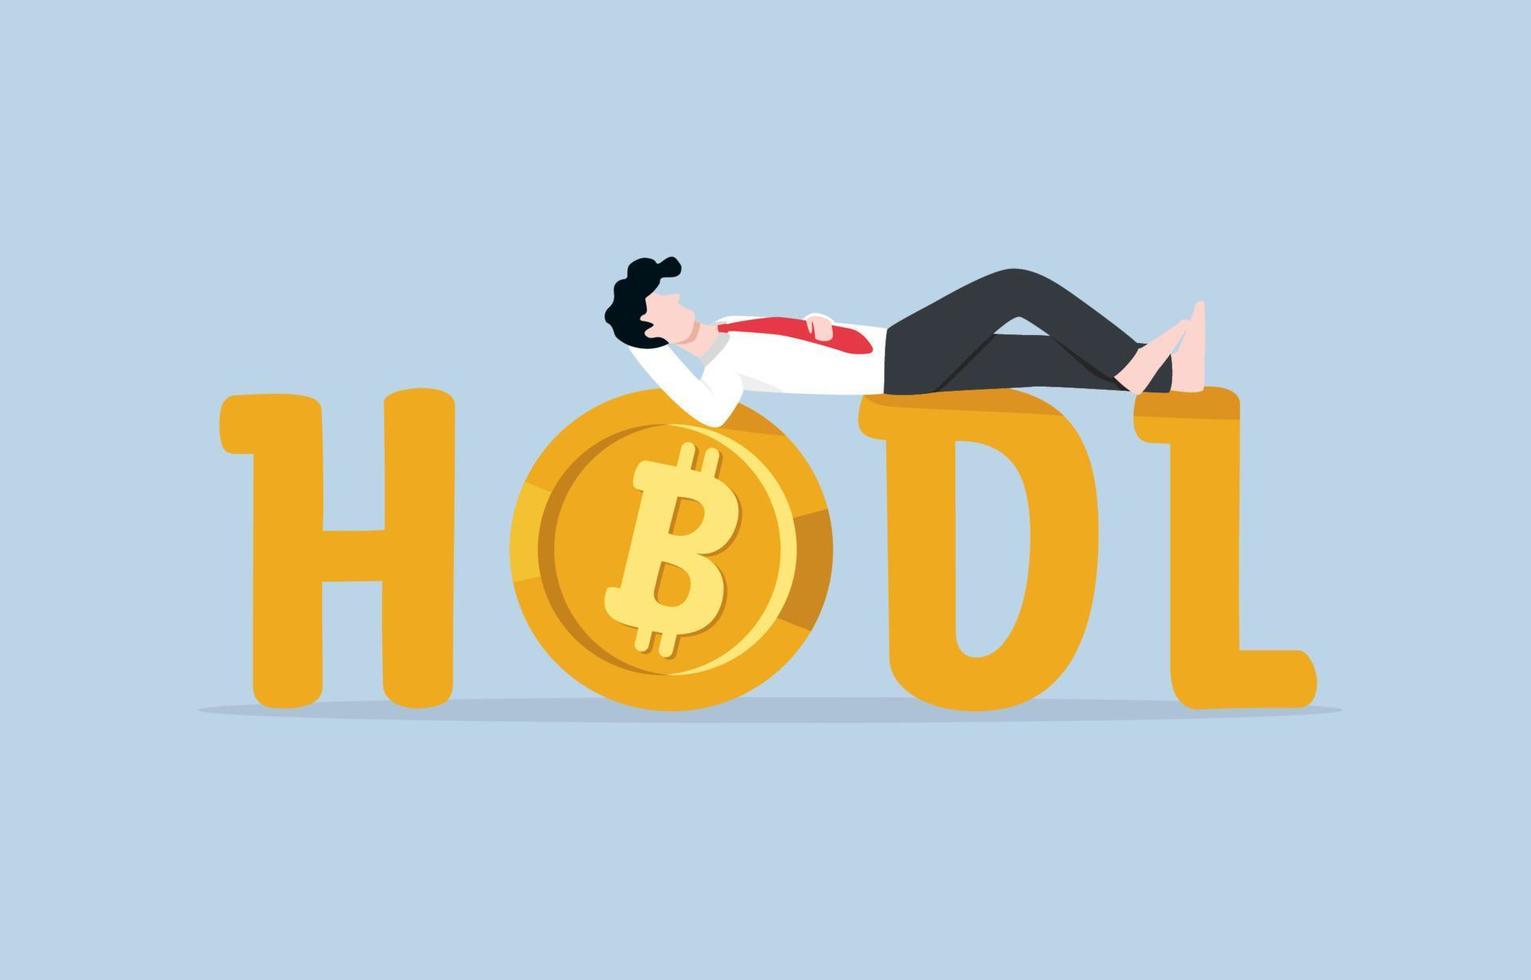 What is HODL? Hodl Meaning – BitcoinWiki